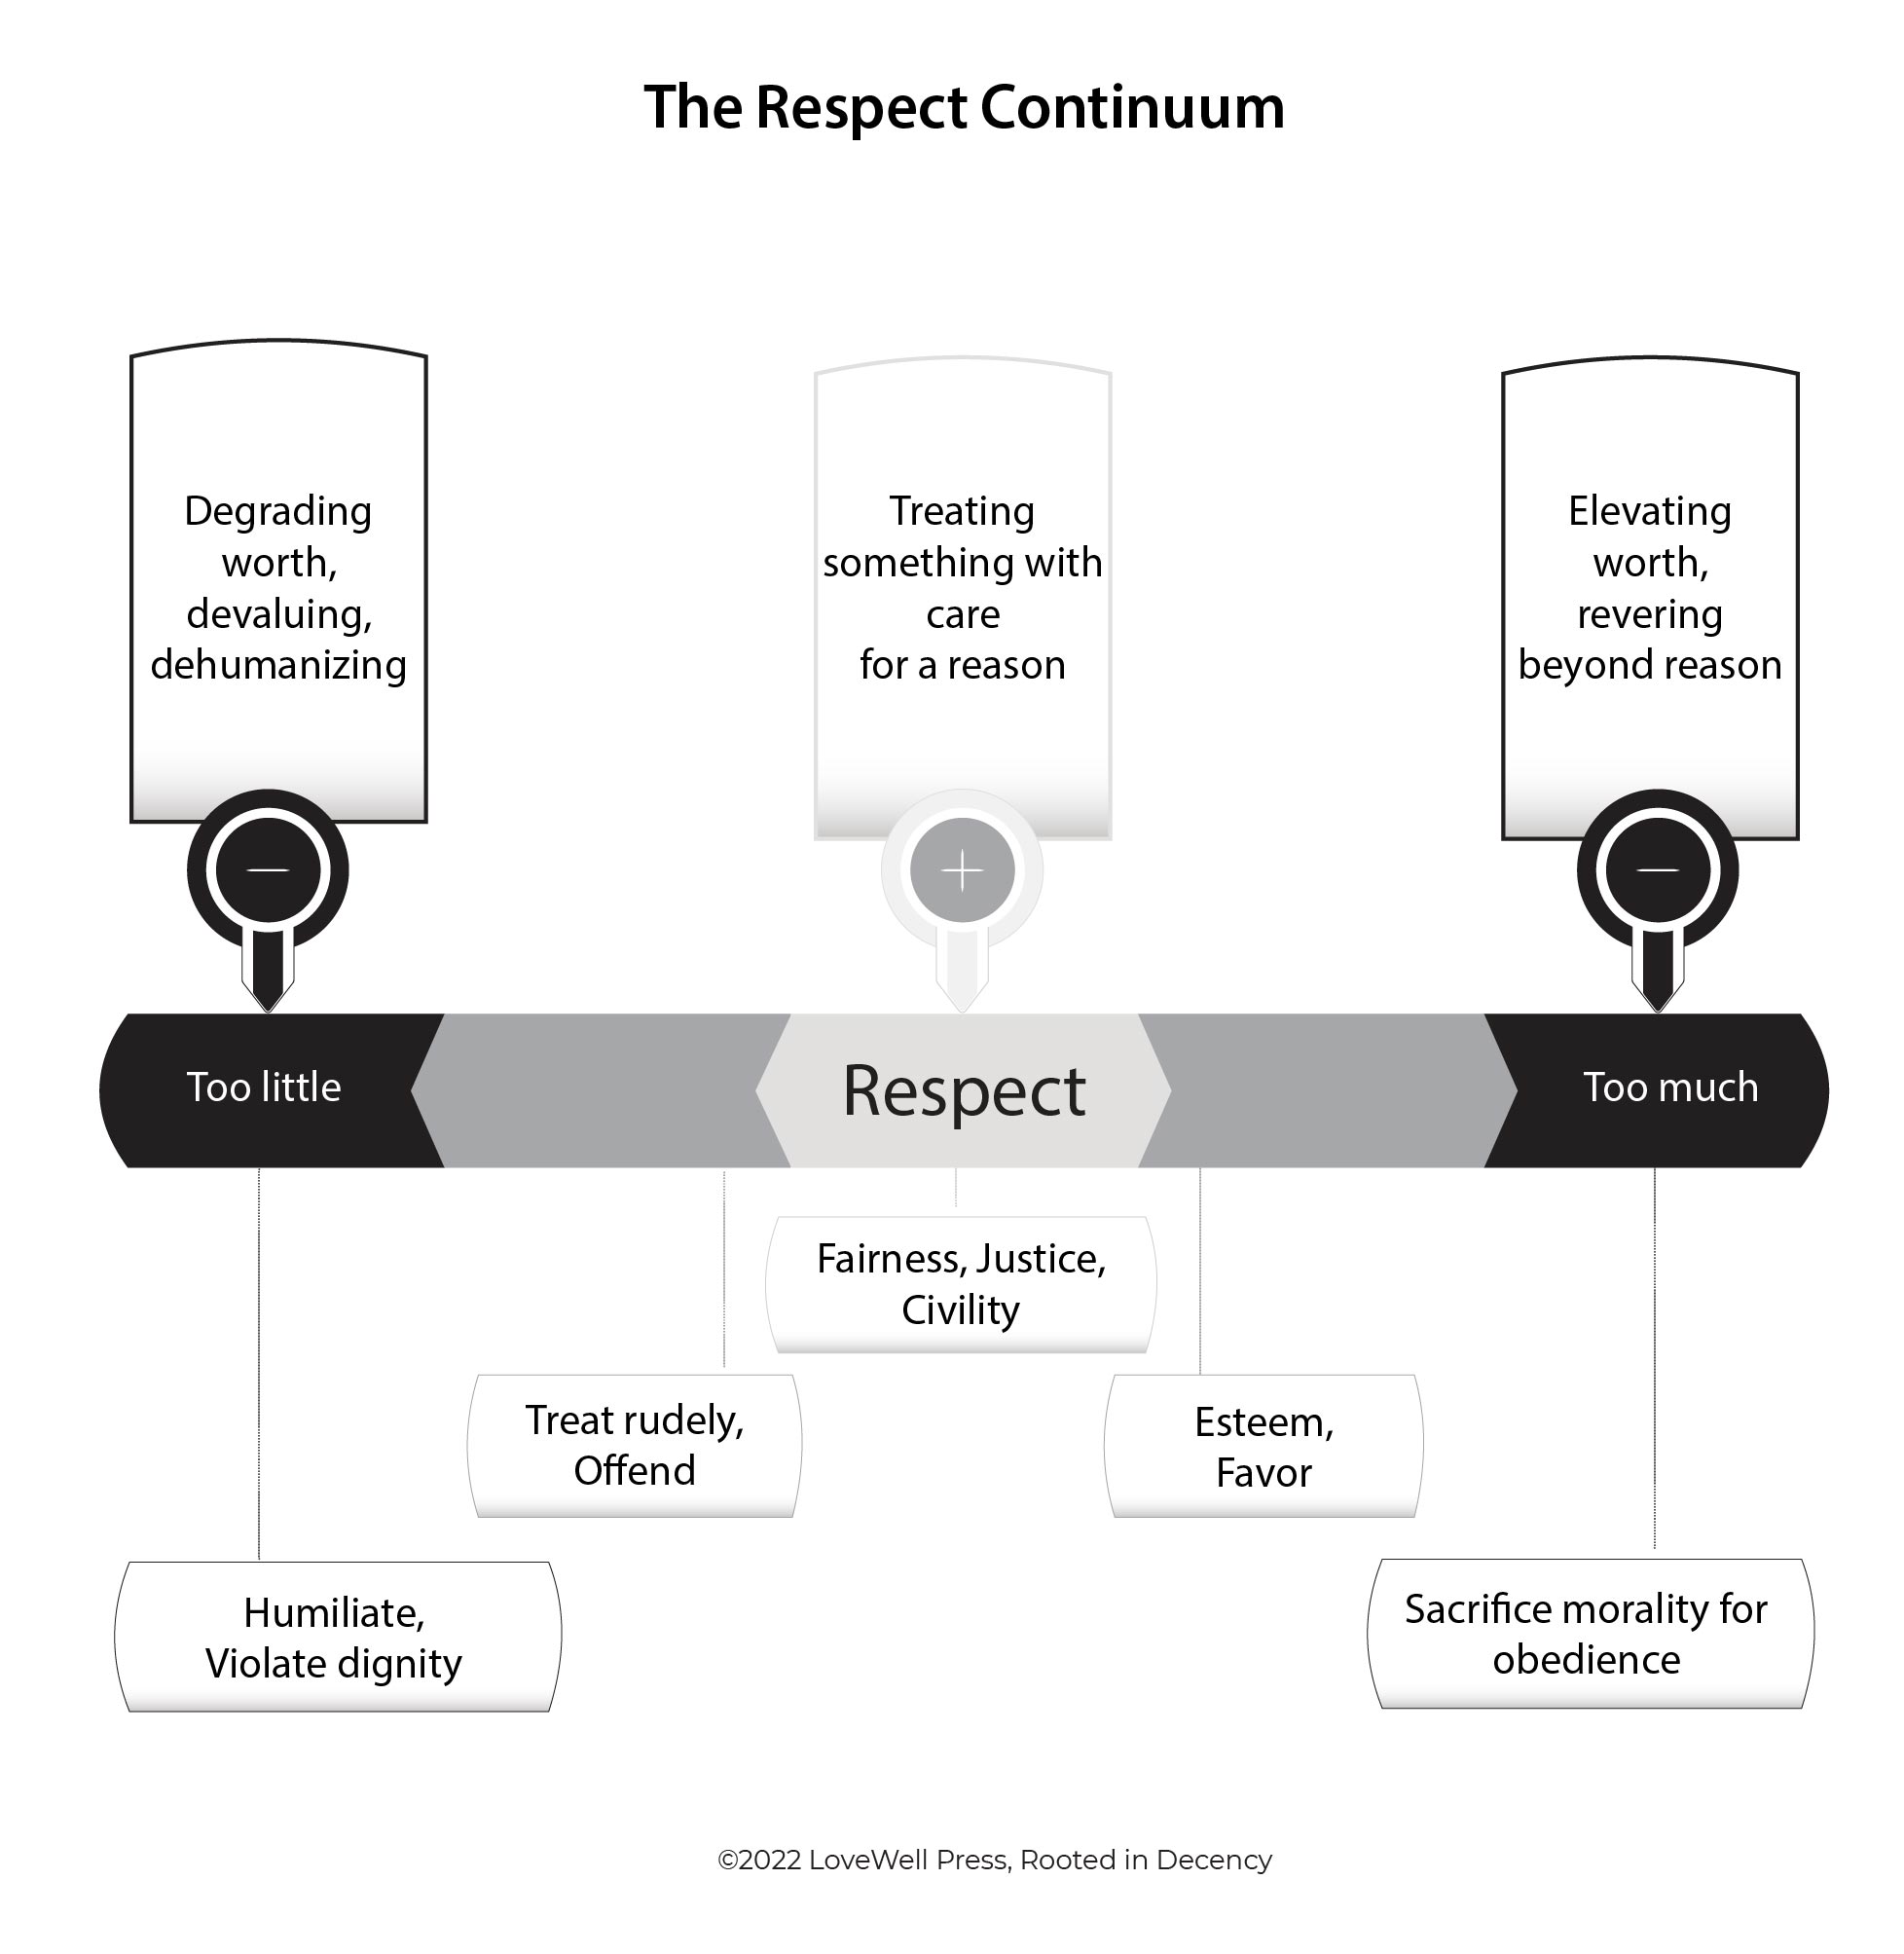 Respect Continuum from Rooted in Decency Book by Colleen Doyle Bryant